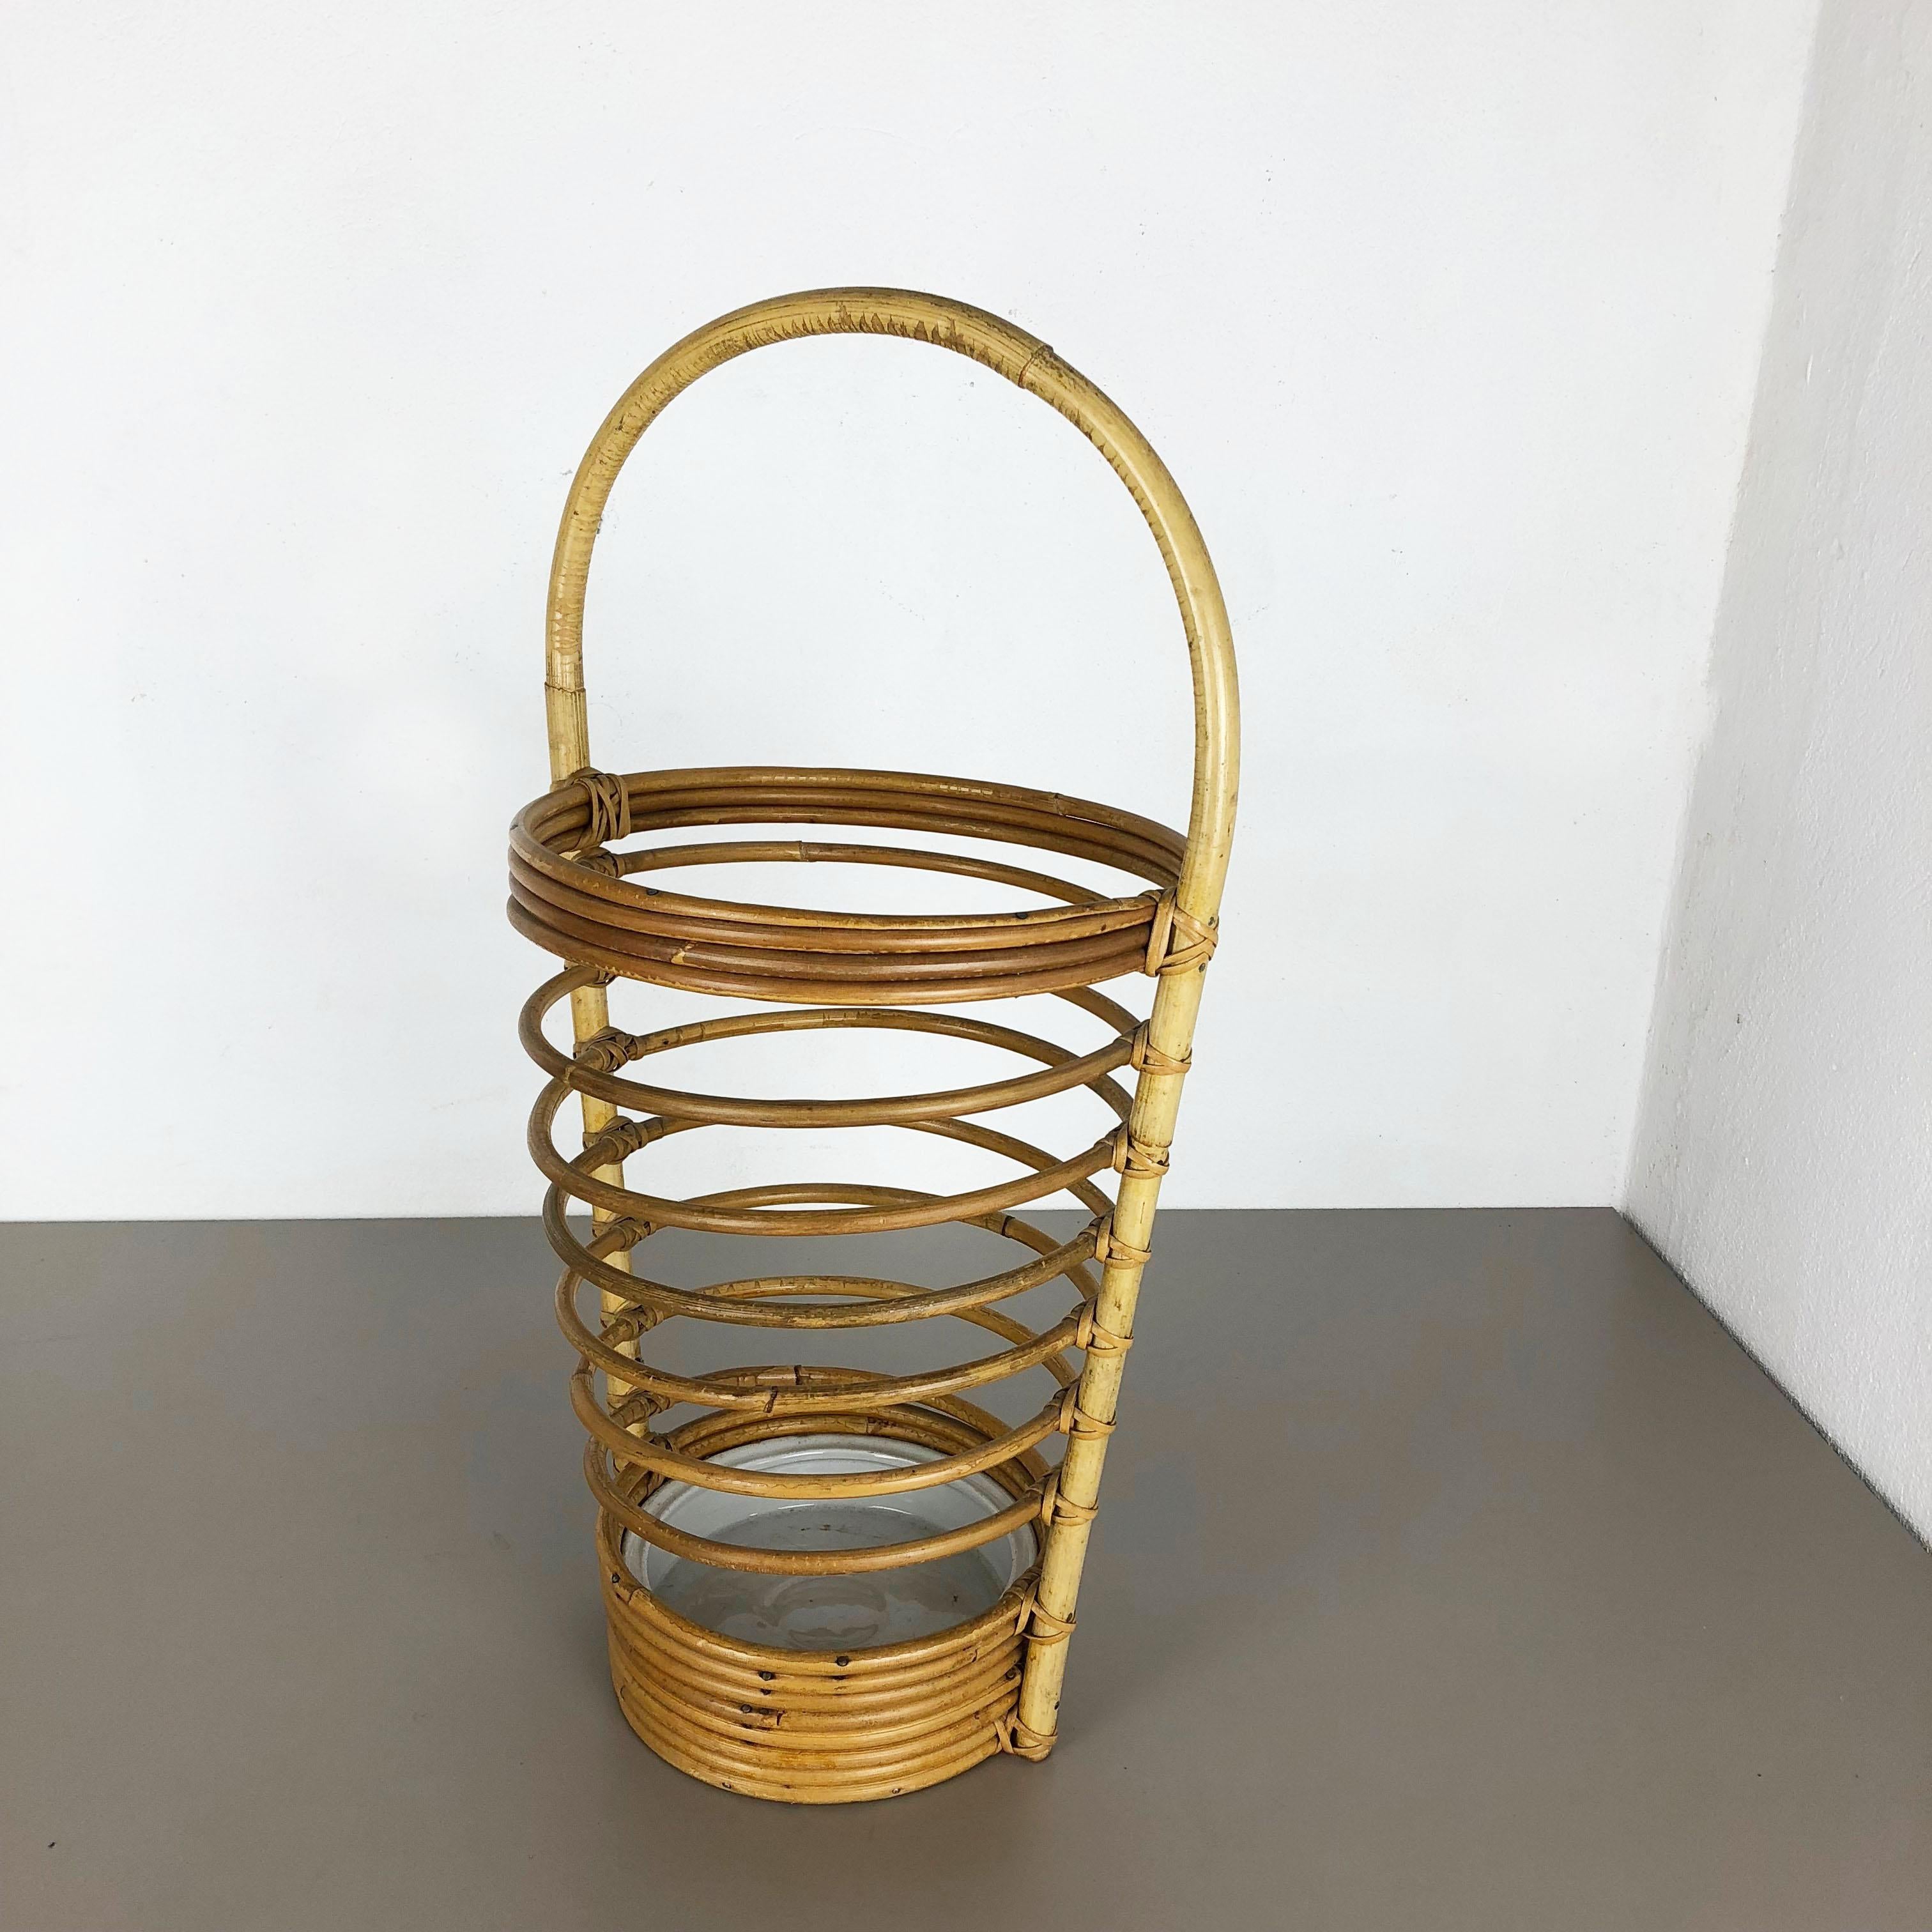 Article:

Umbrella stand


Origin:

France



Age: 

1970s


This original vintage Bauhaus style umbrella stand was produced in the 1970s in France. It is made of natural rattan with a loop handle element at the top. This item has a fantastic look